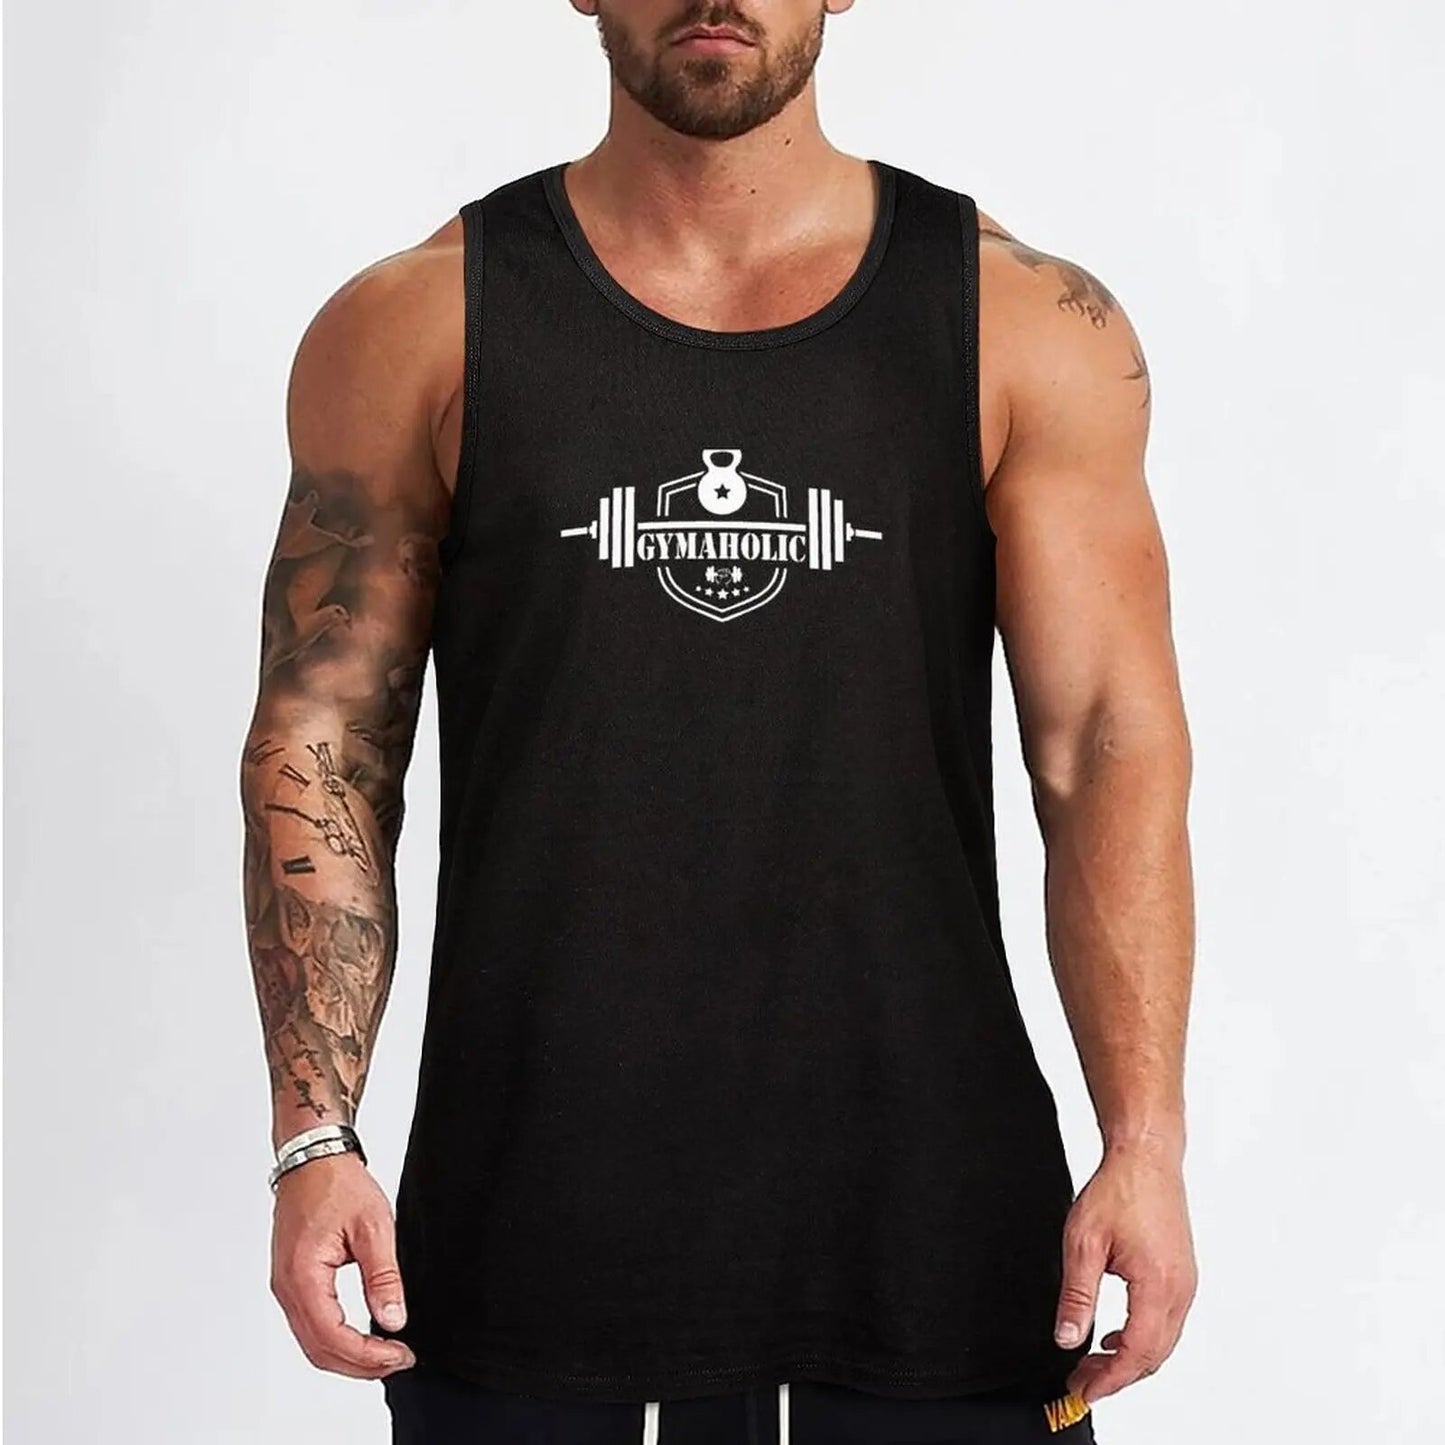 New Gymaholic Tank Top Man gym clothes gym training accessories Men's cotton t-shirt